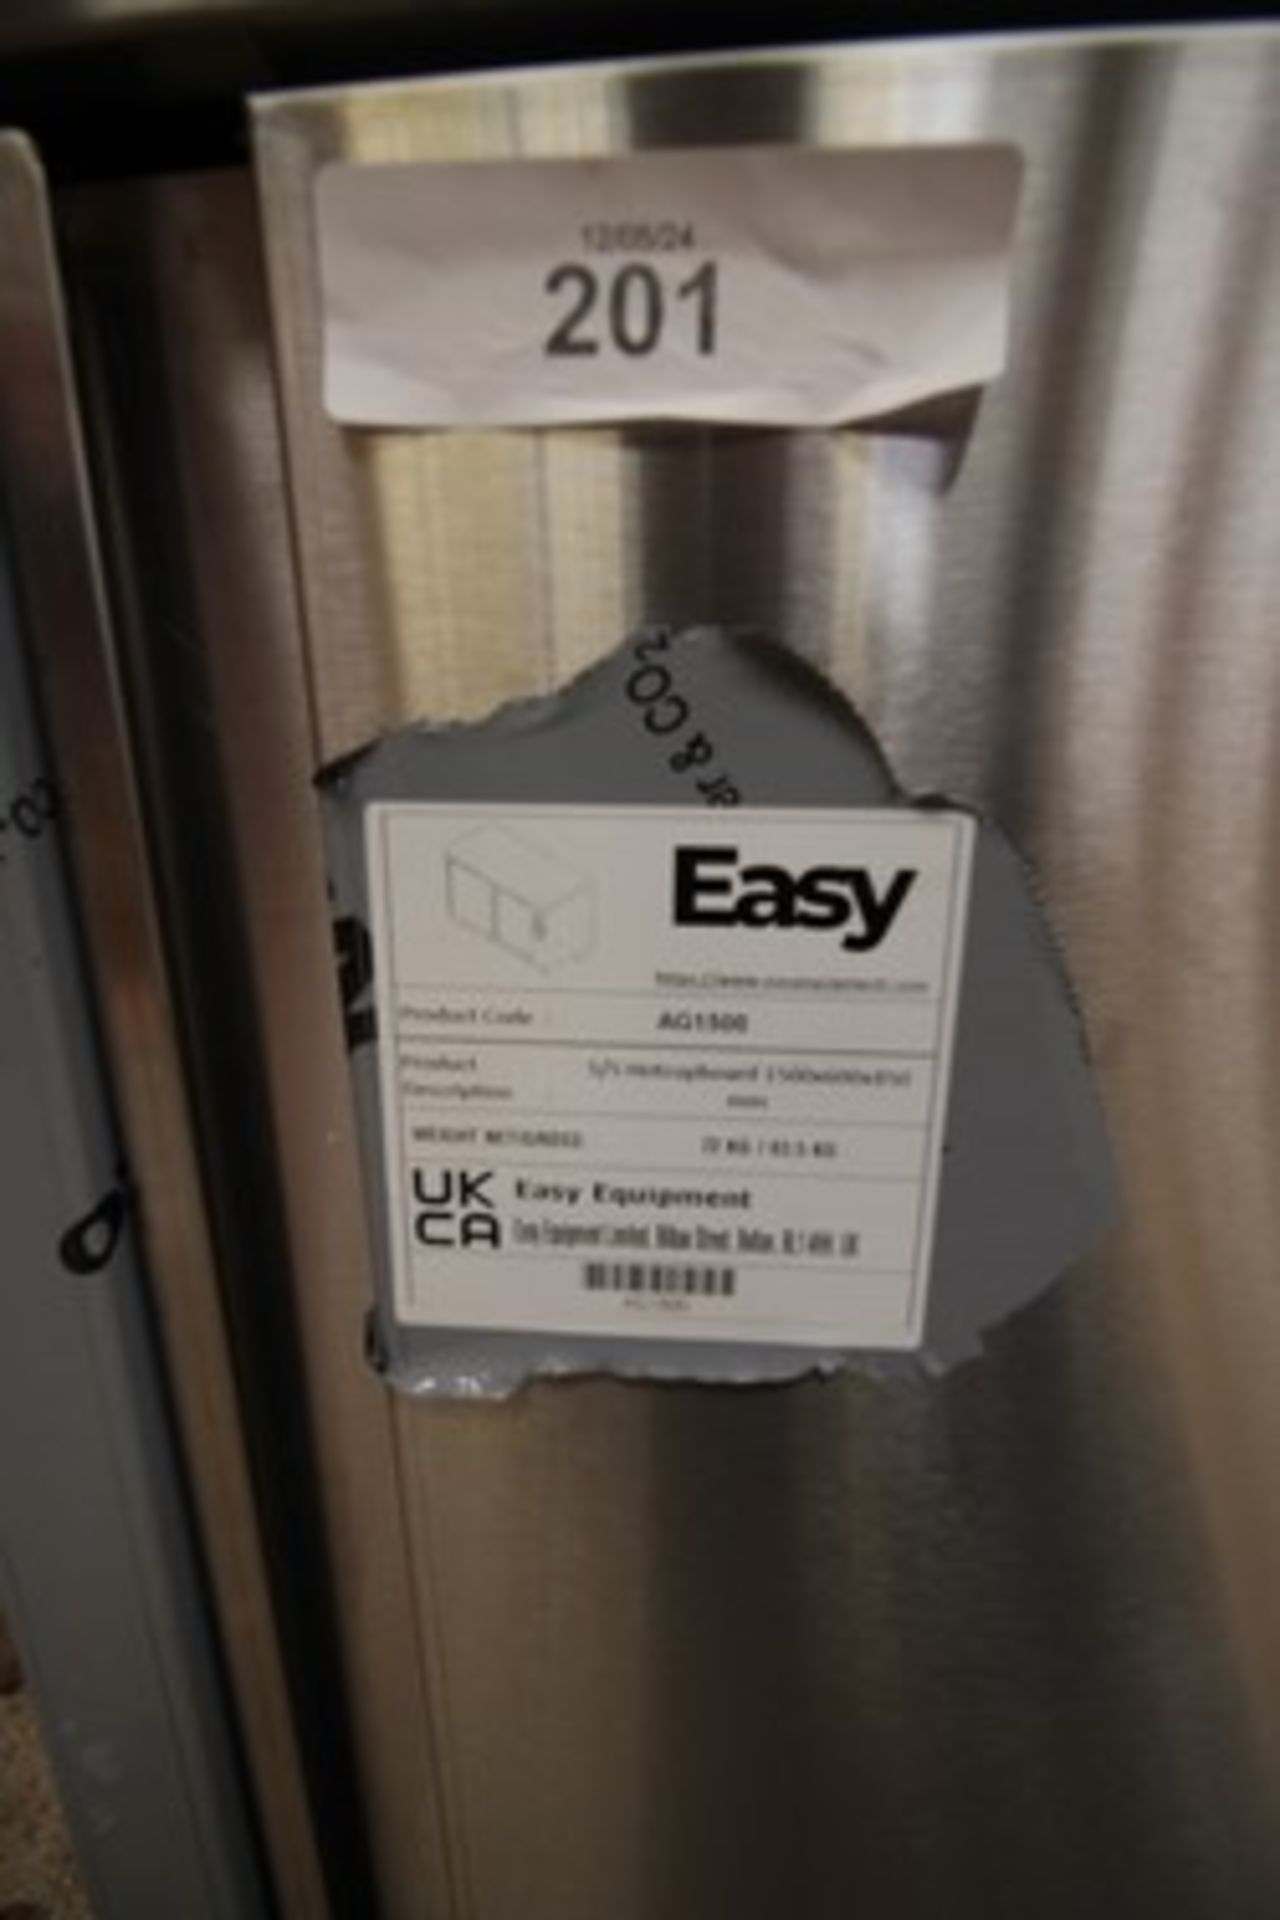 1 x Easy stainless steel hot cupboard, code AG1500, size 1500 x 600 x 850mm,. We have powered it - Image 2 of 3